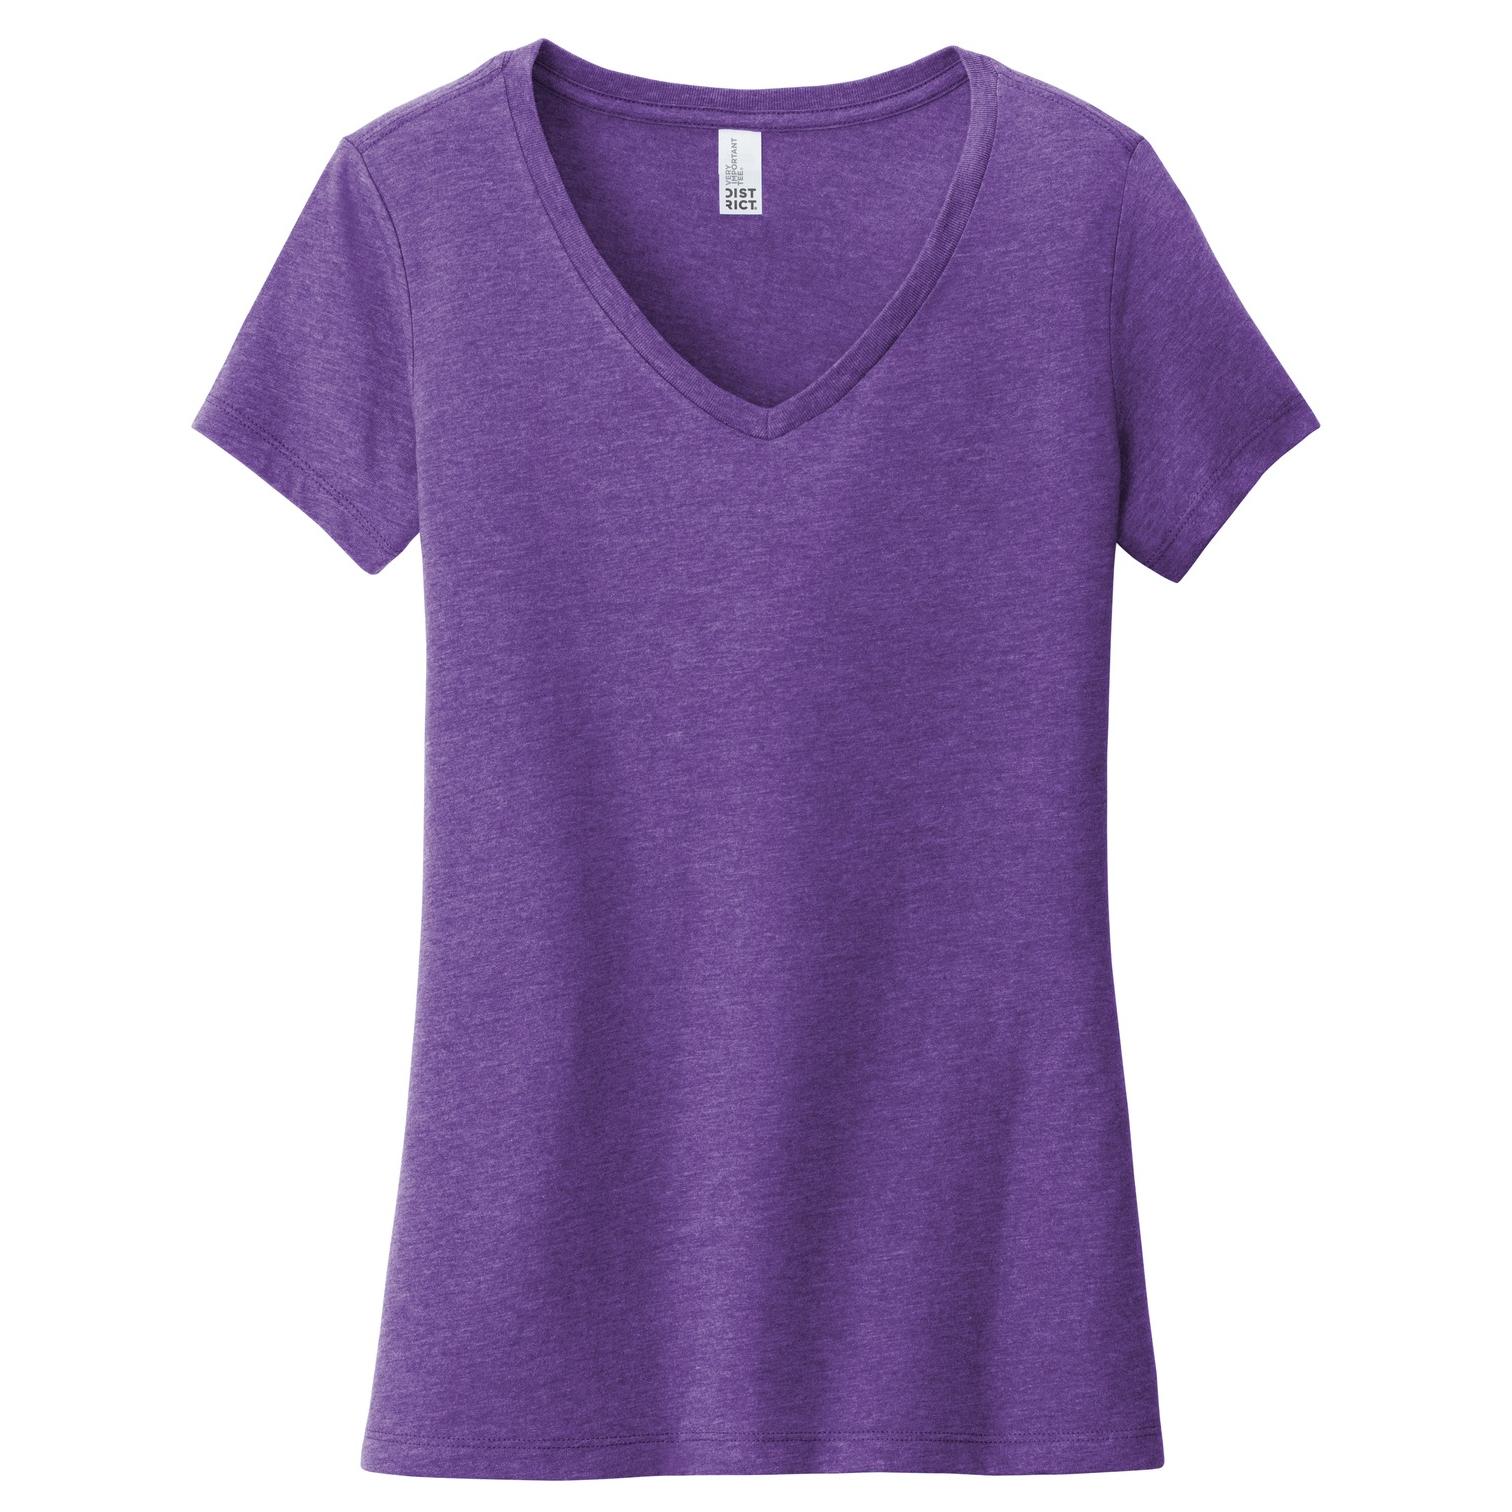 District DT6503 Women's Very Important Tee V-Neck - Heathered Purple ...